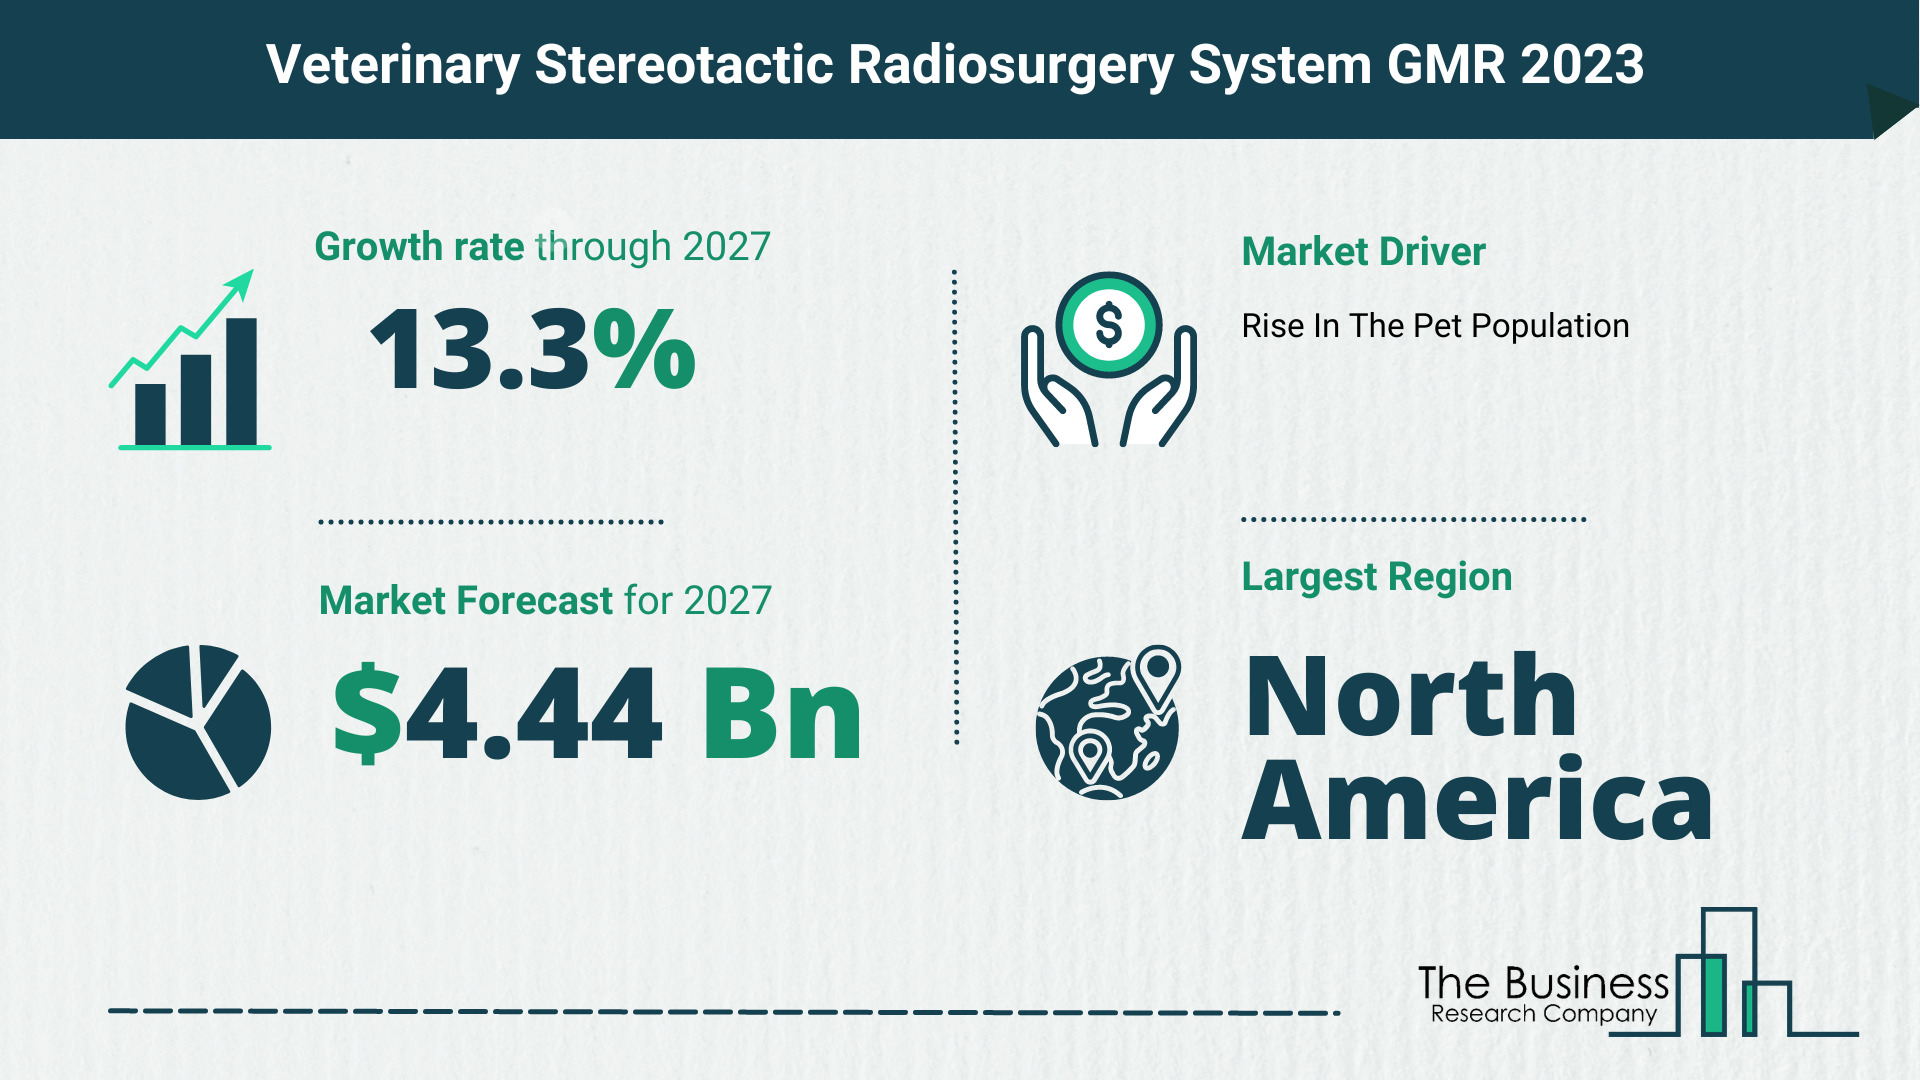 What Will The Veterinary Stereotactic Radiosurgery System Market Look Like In 2023?